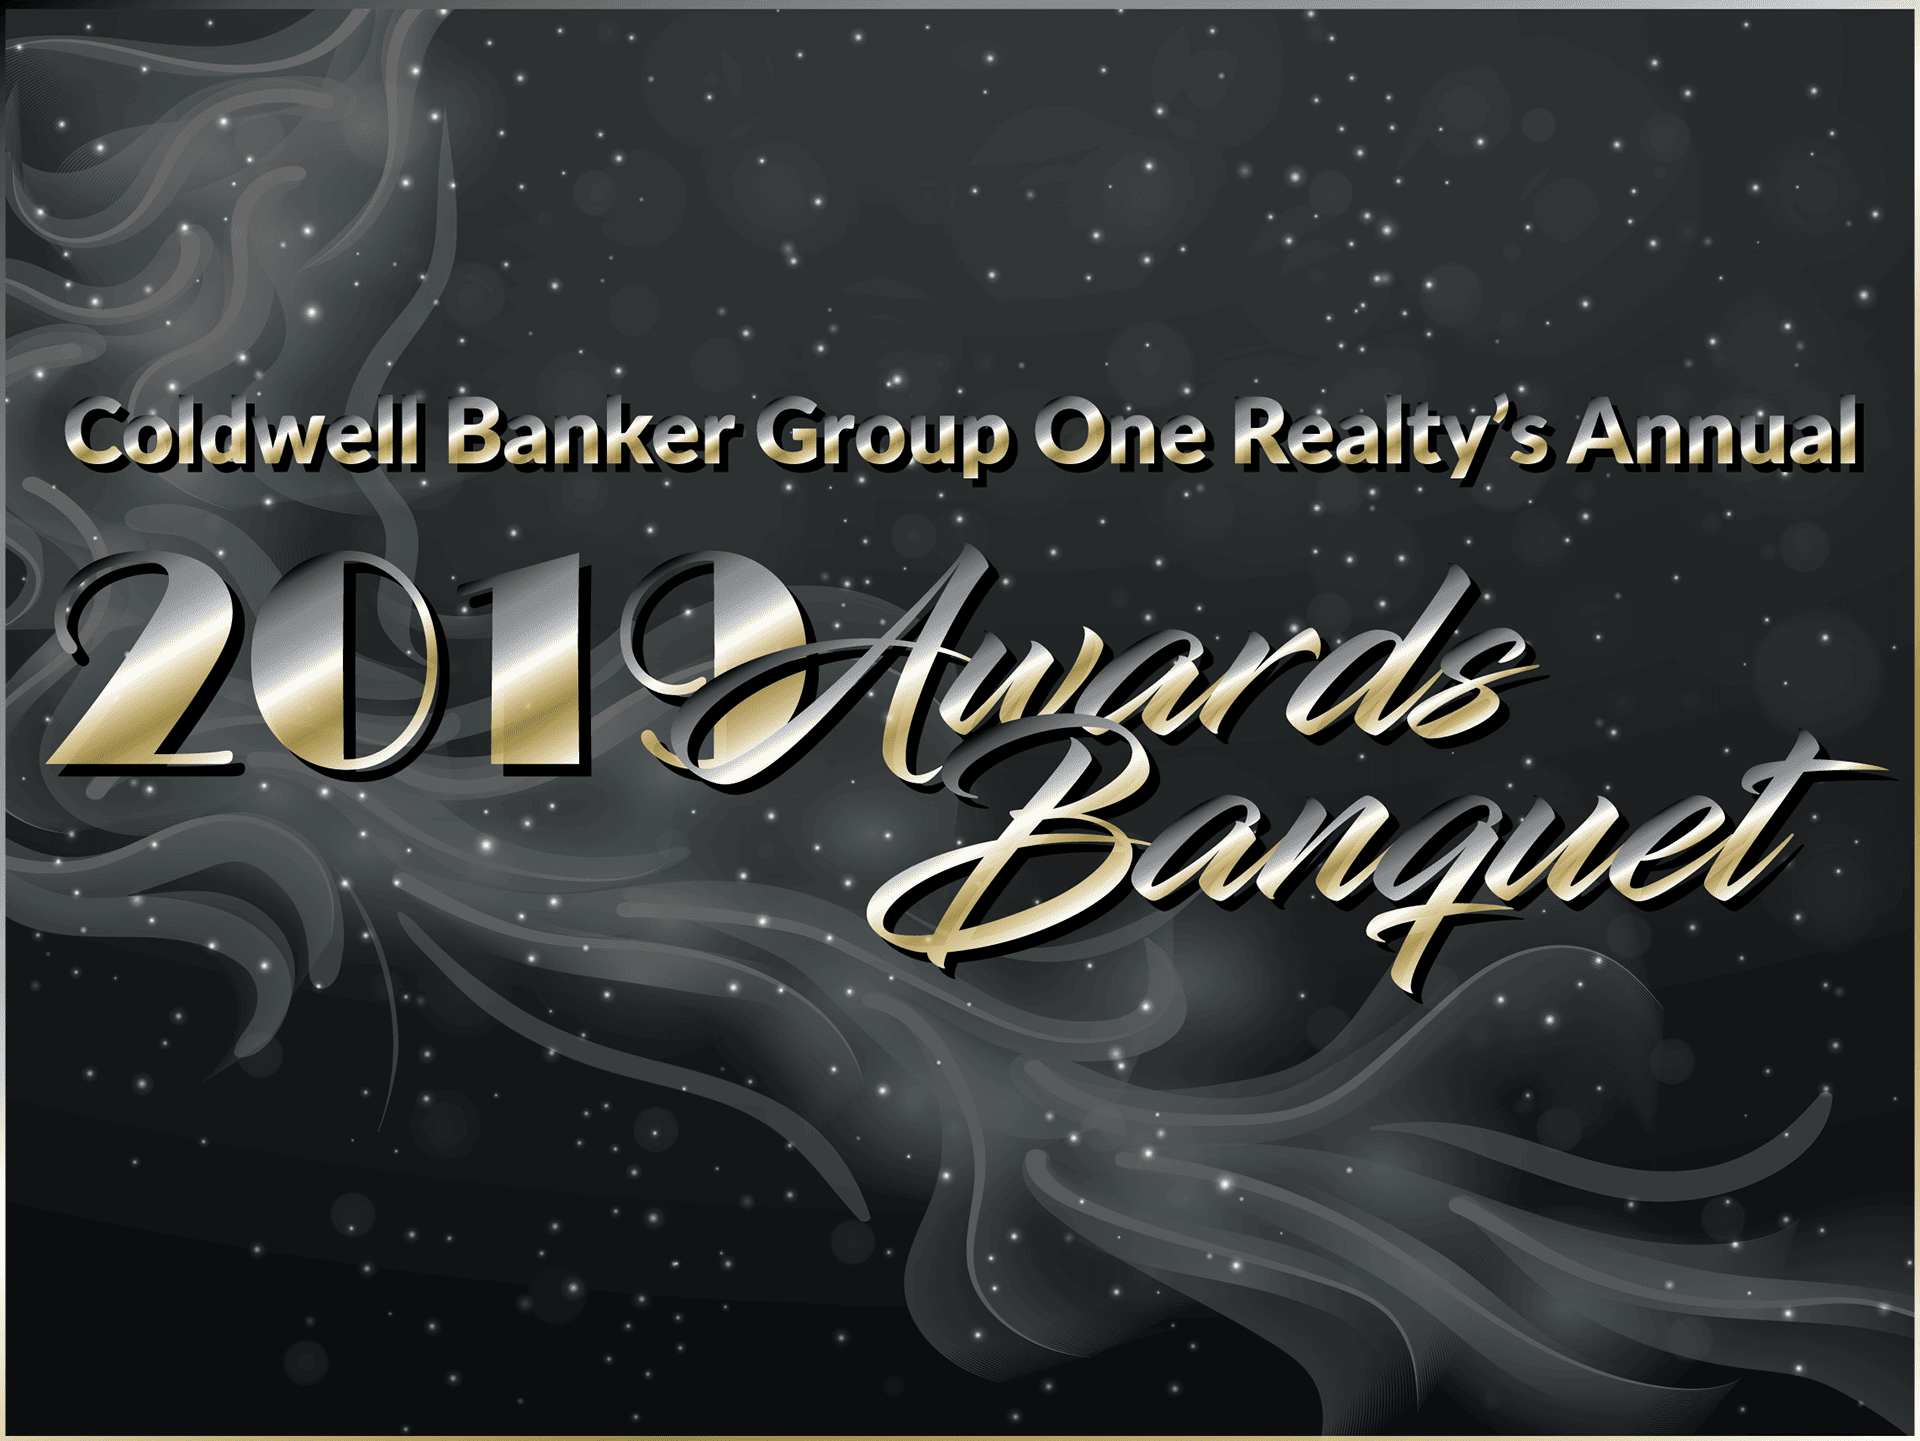 2019 Awards Banquet powerpoint image